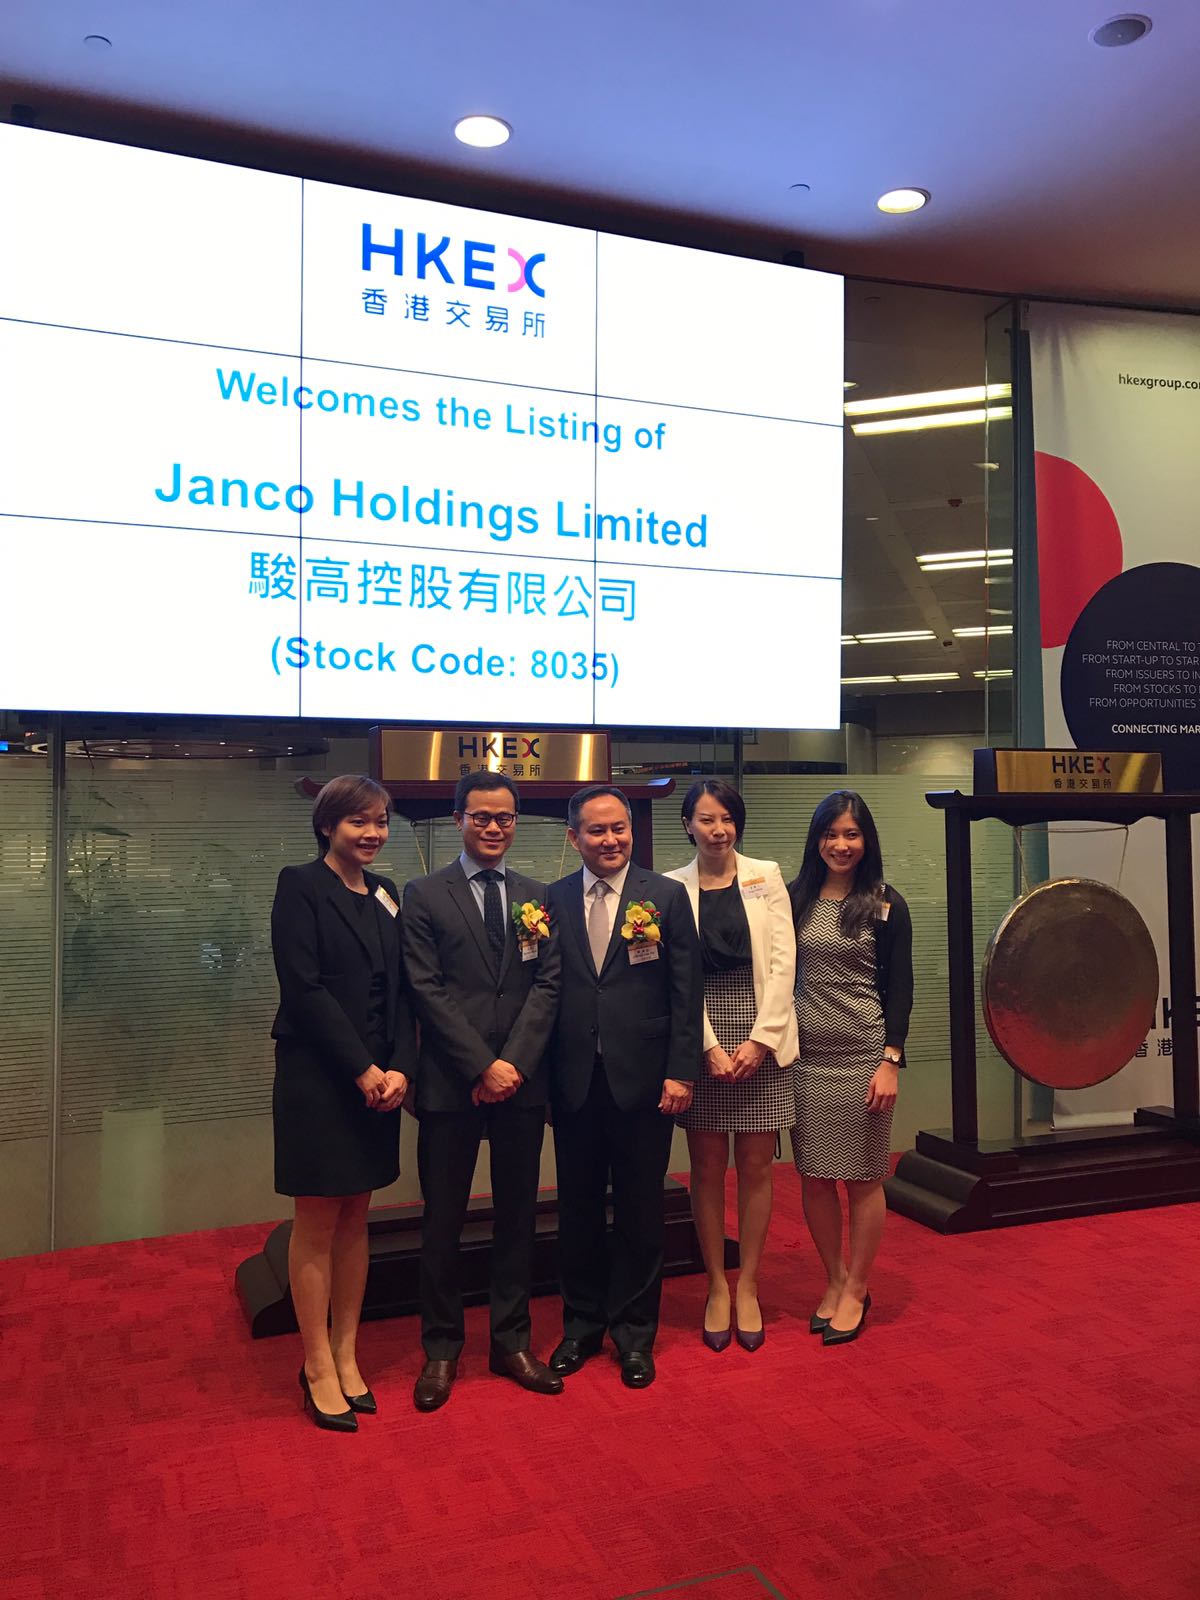 ONC advised on the listing of Janco Holdings Limited